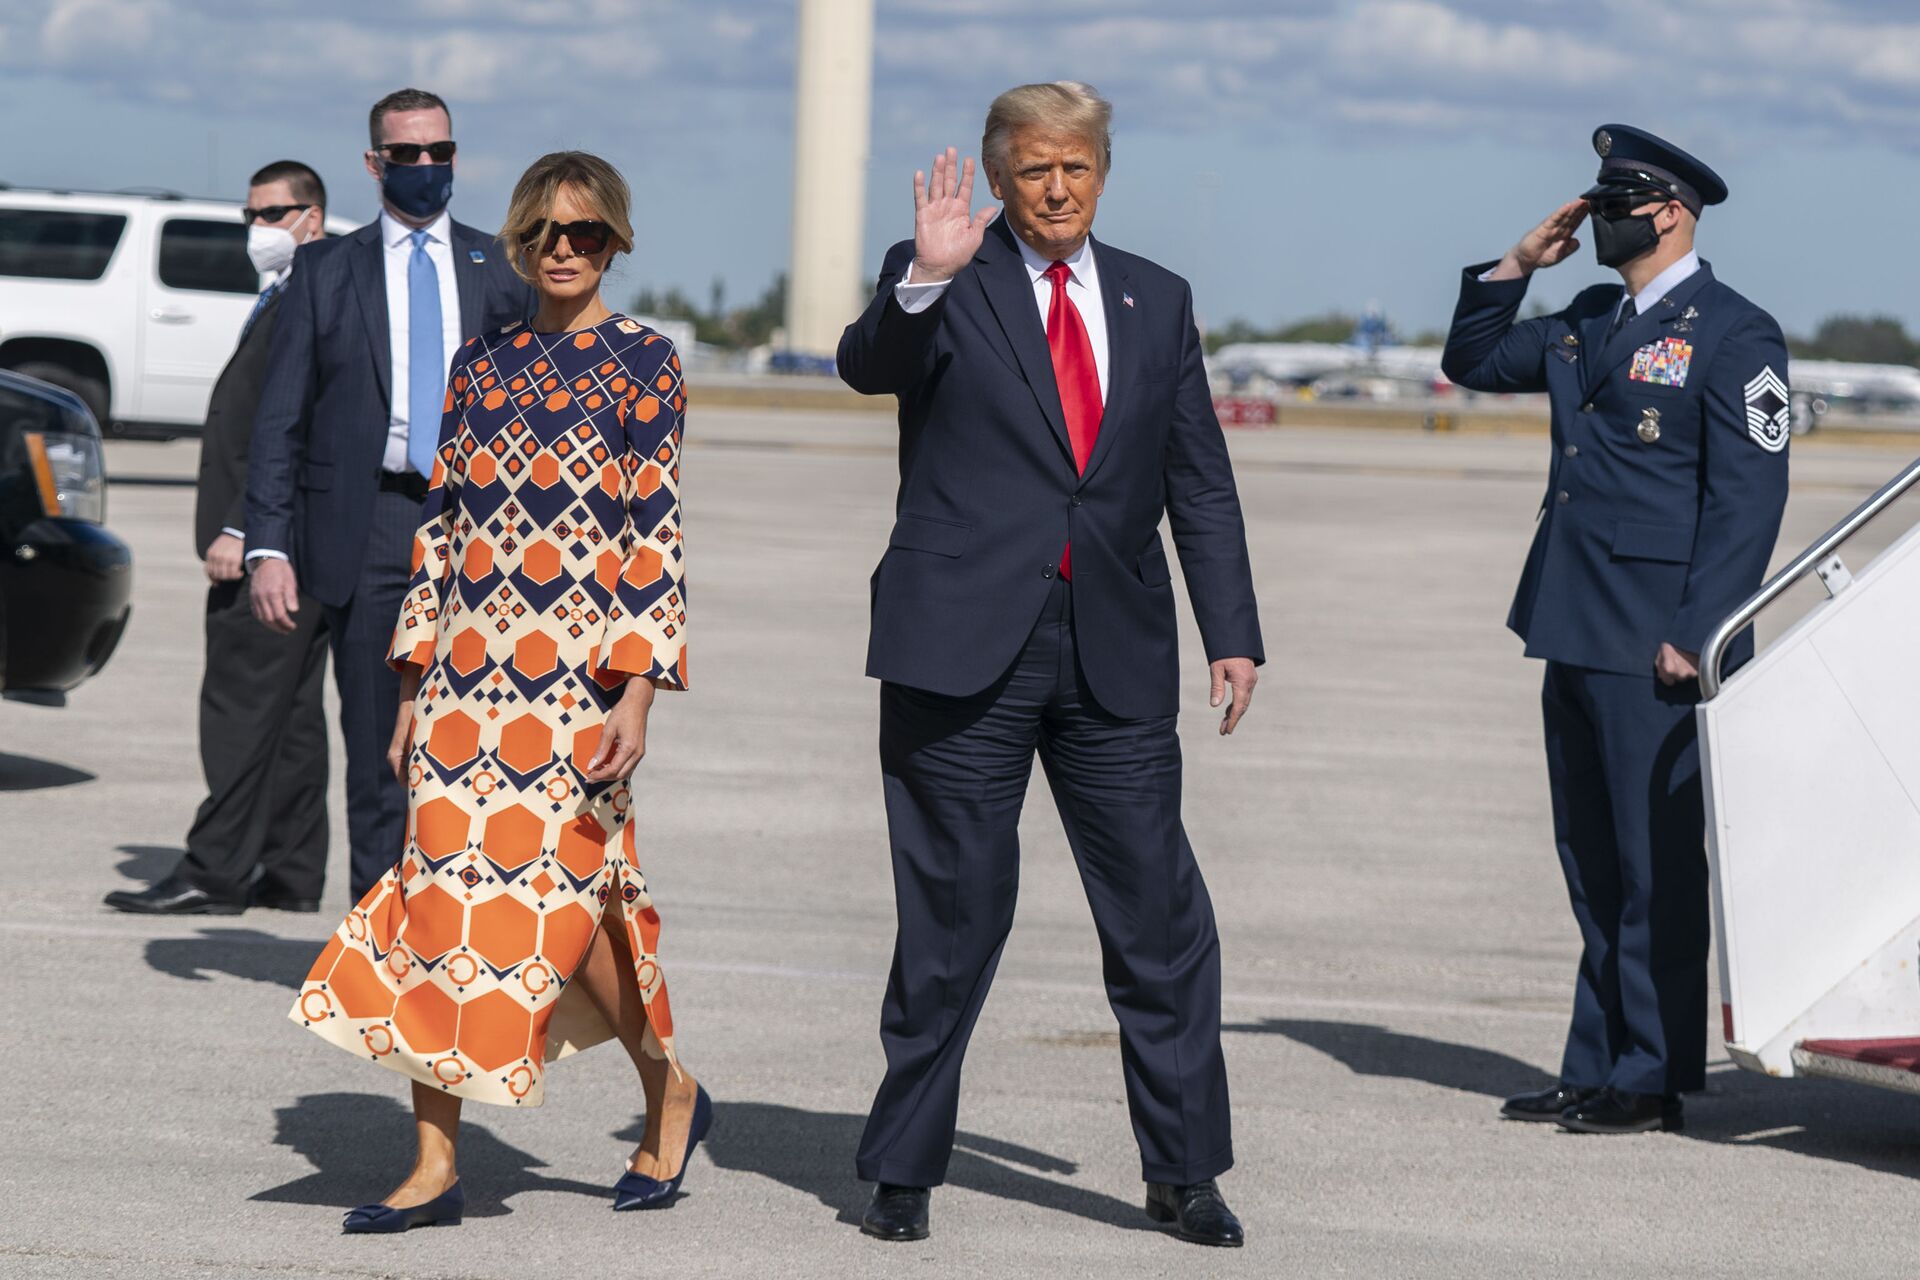 Melania, ‘Early Riser’ Donald Trump 'Stay in Separate Rooms' While Away, Claims Biography Author - Sputnik International, 1920, 04.04.2021